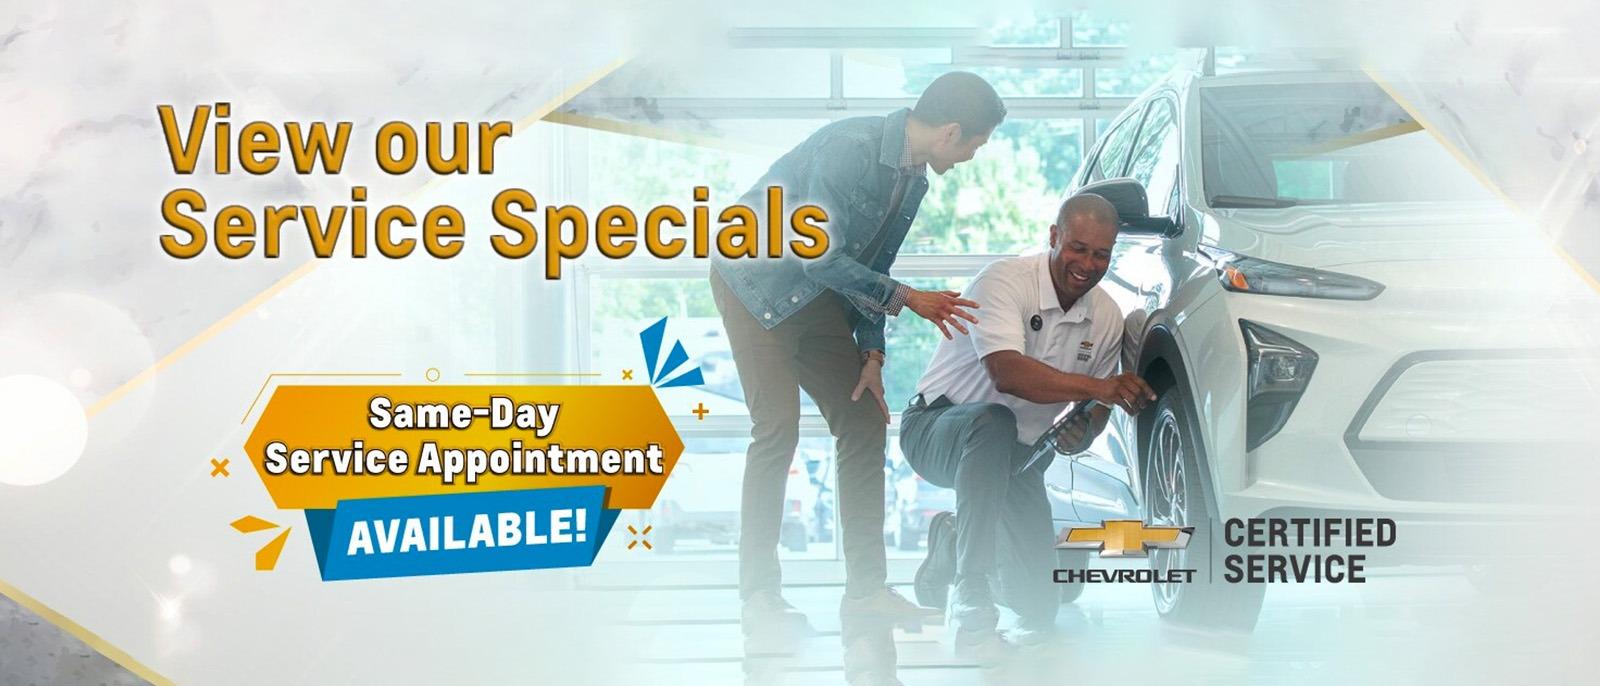 View our Service Specials | Certified Service | Chevrolet